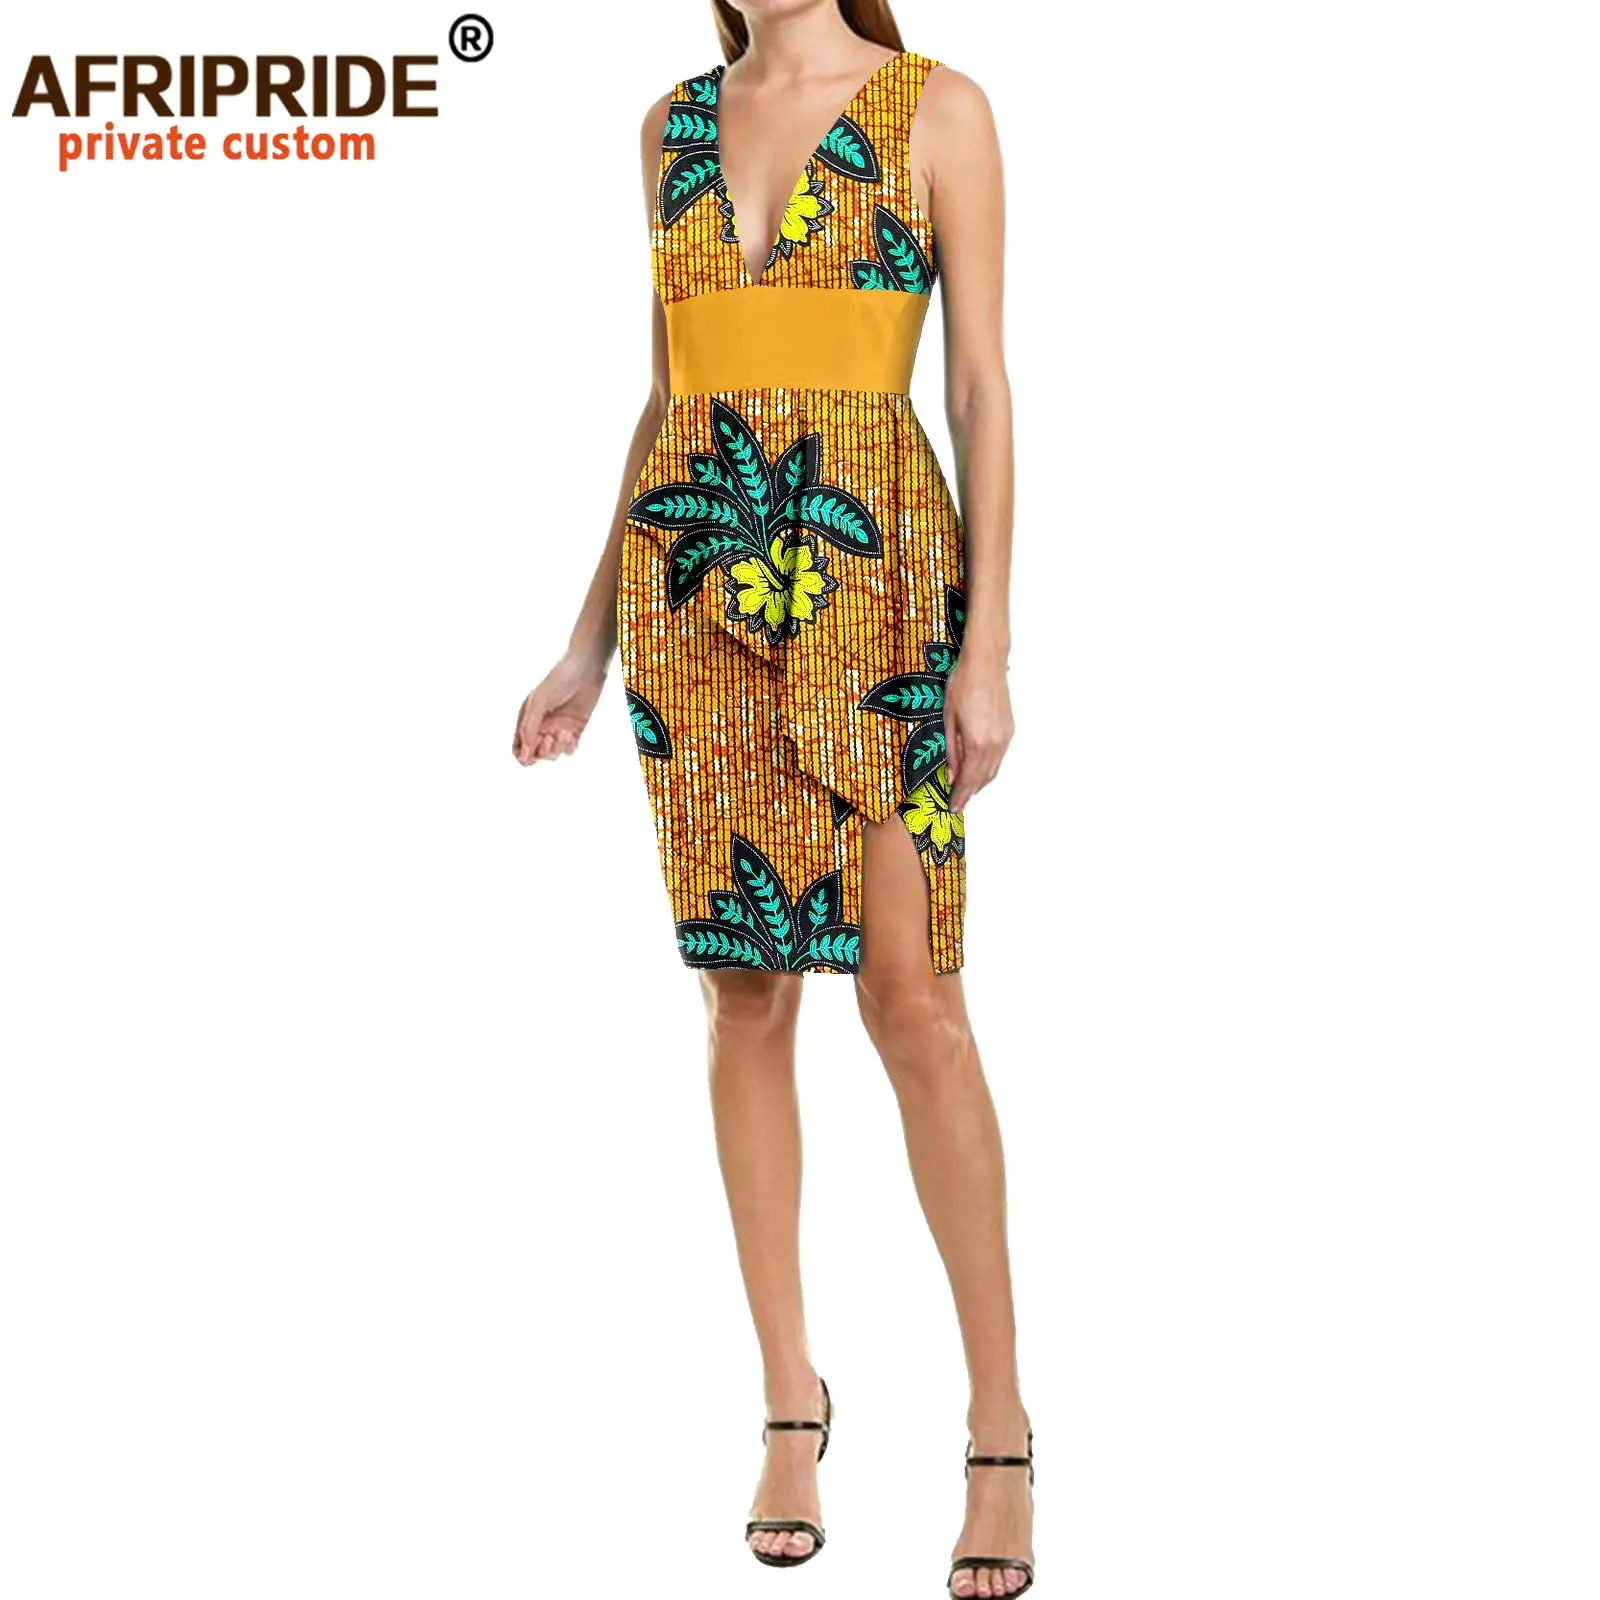 2022 Summer African Dresses for Women Party Print Elegant Dress for Lady Sexy Fashion Casual Dress with Belt Wax Attire A2125011